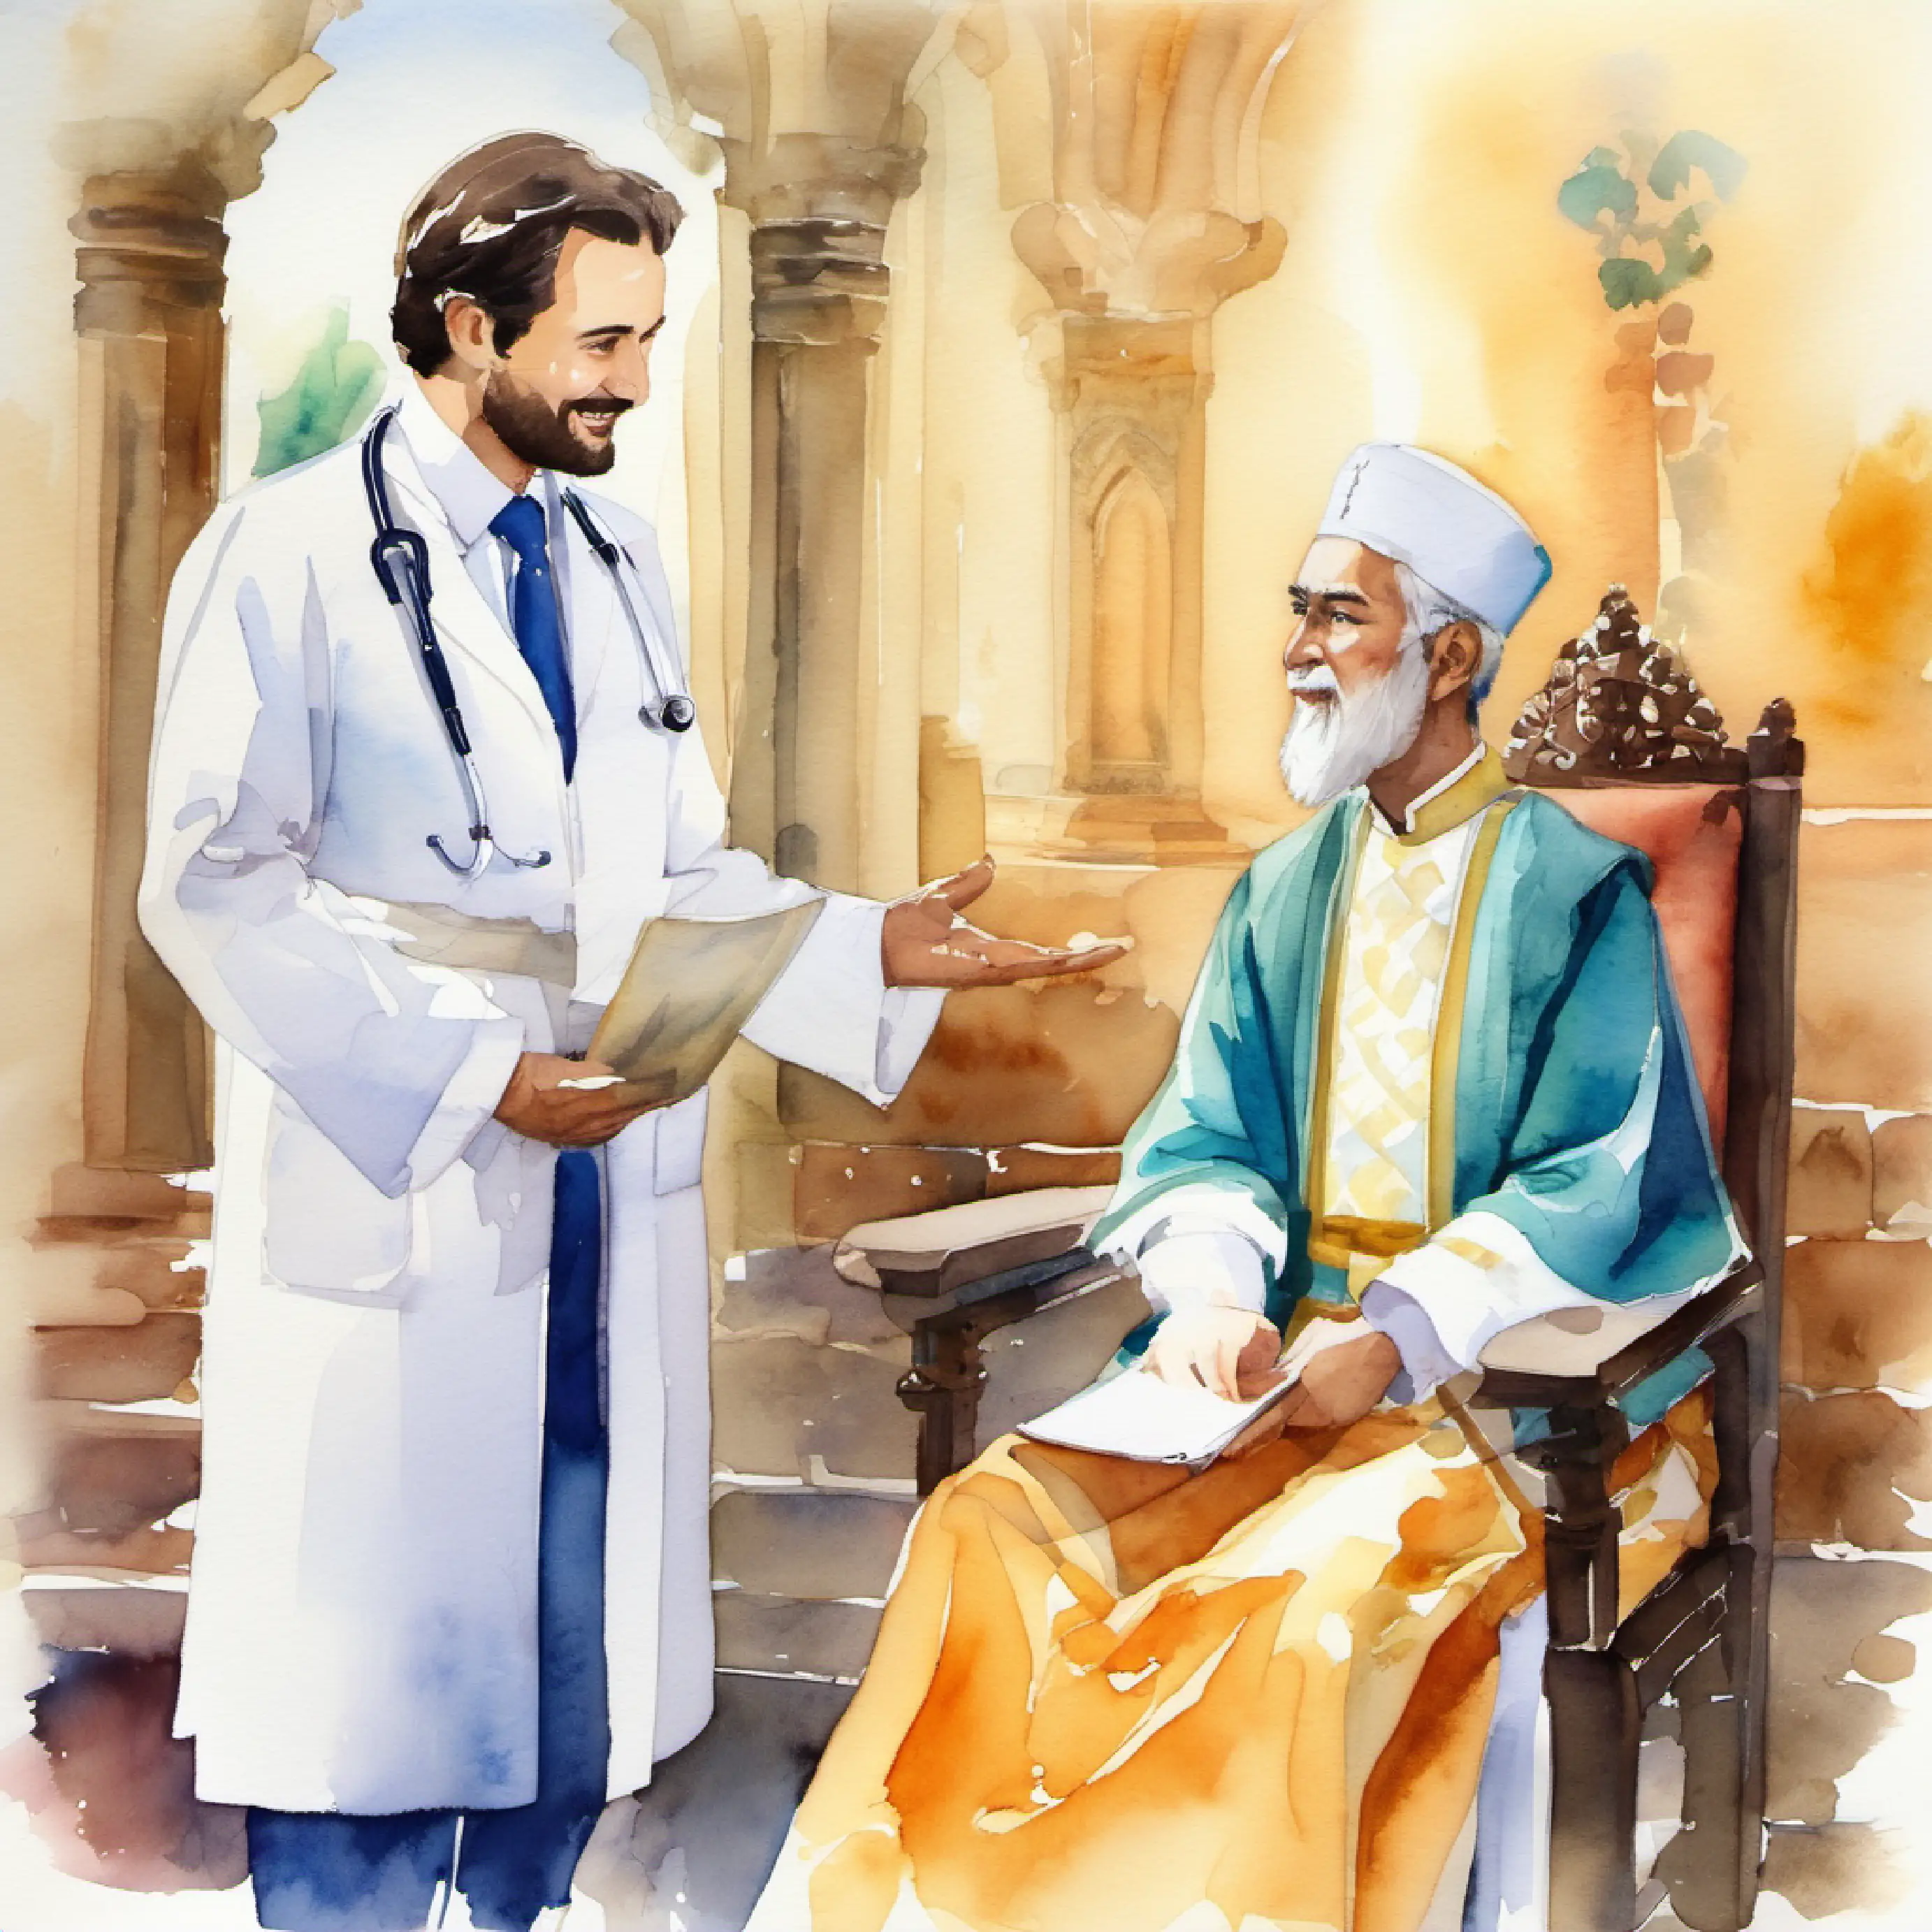 The king requests Young doctor with healing hands, kind eyes, warm smile's expertise.